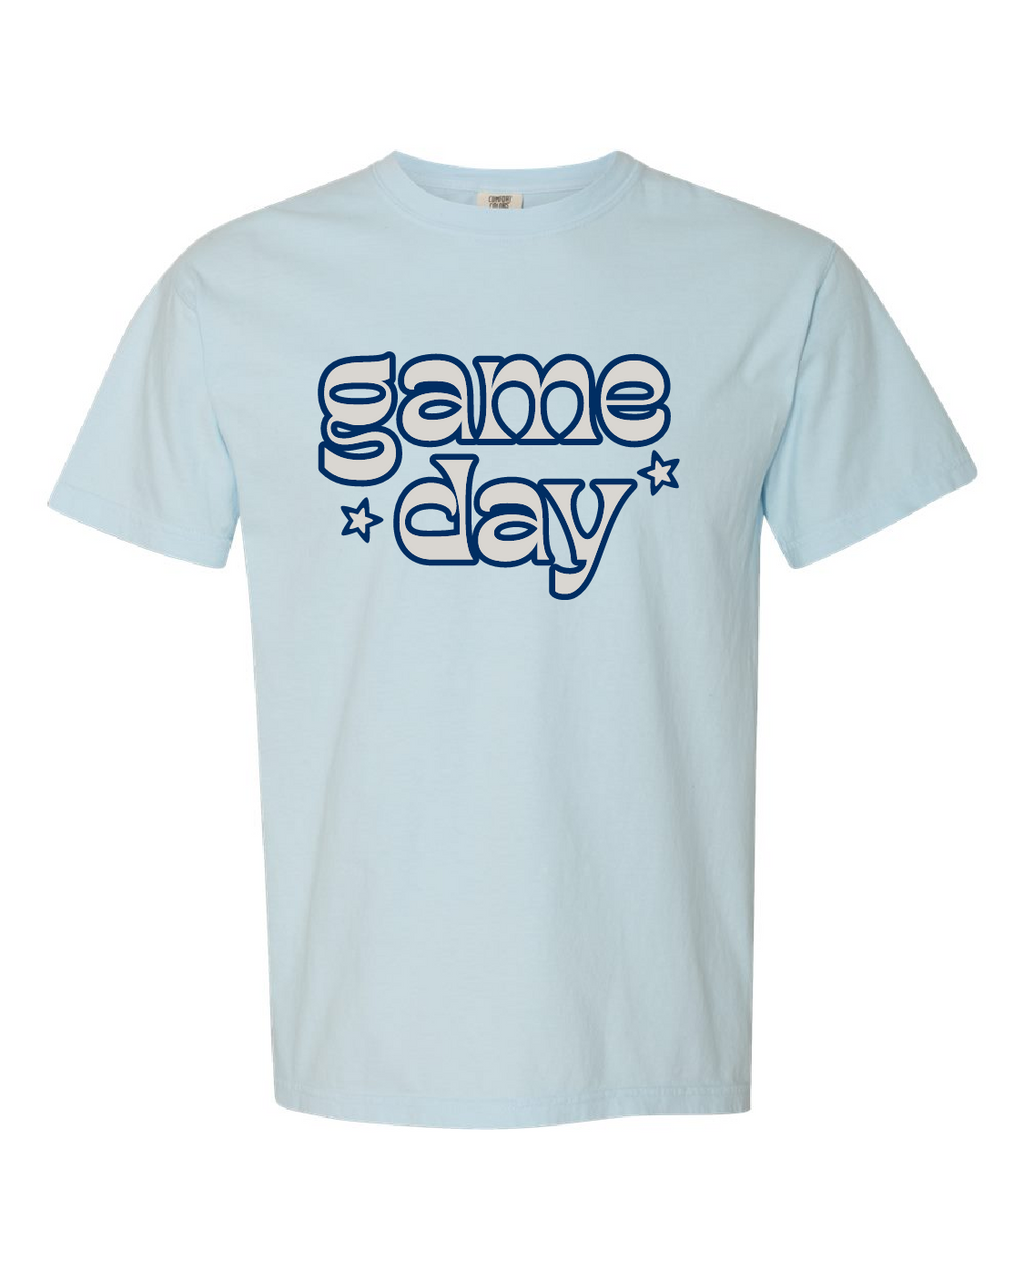 retro print navy + grey "game day" tee in light blue